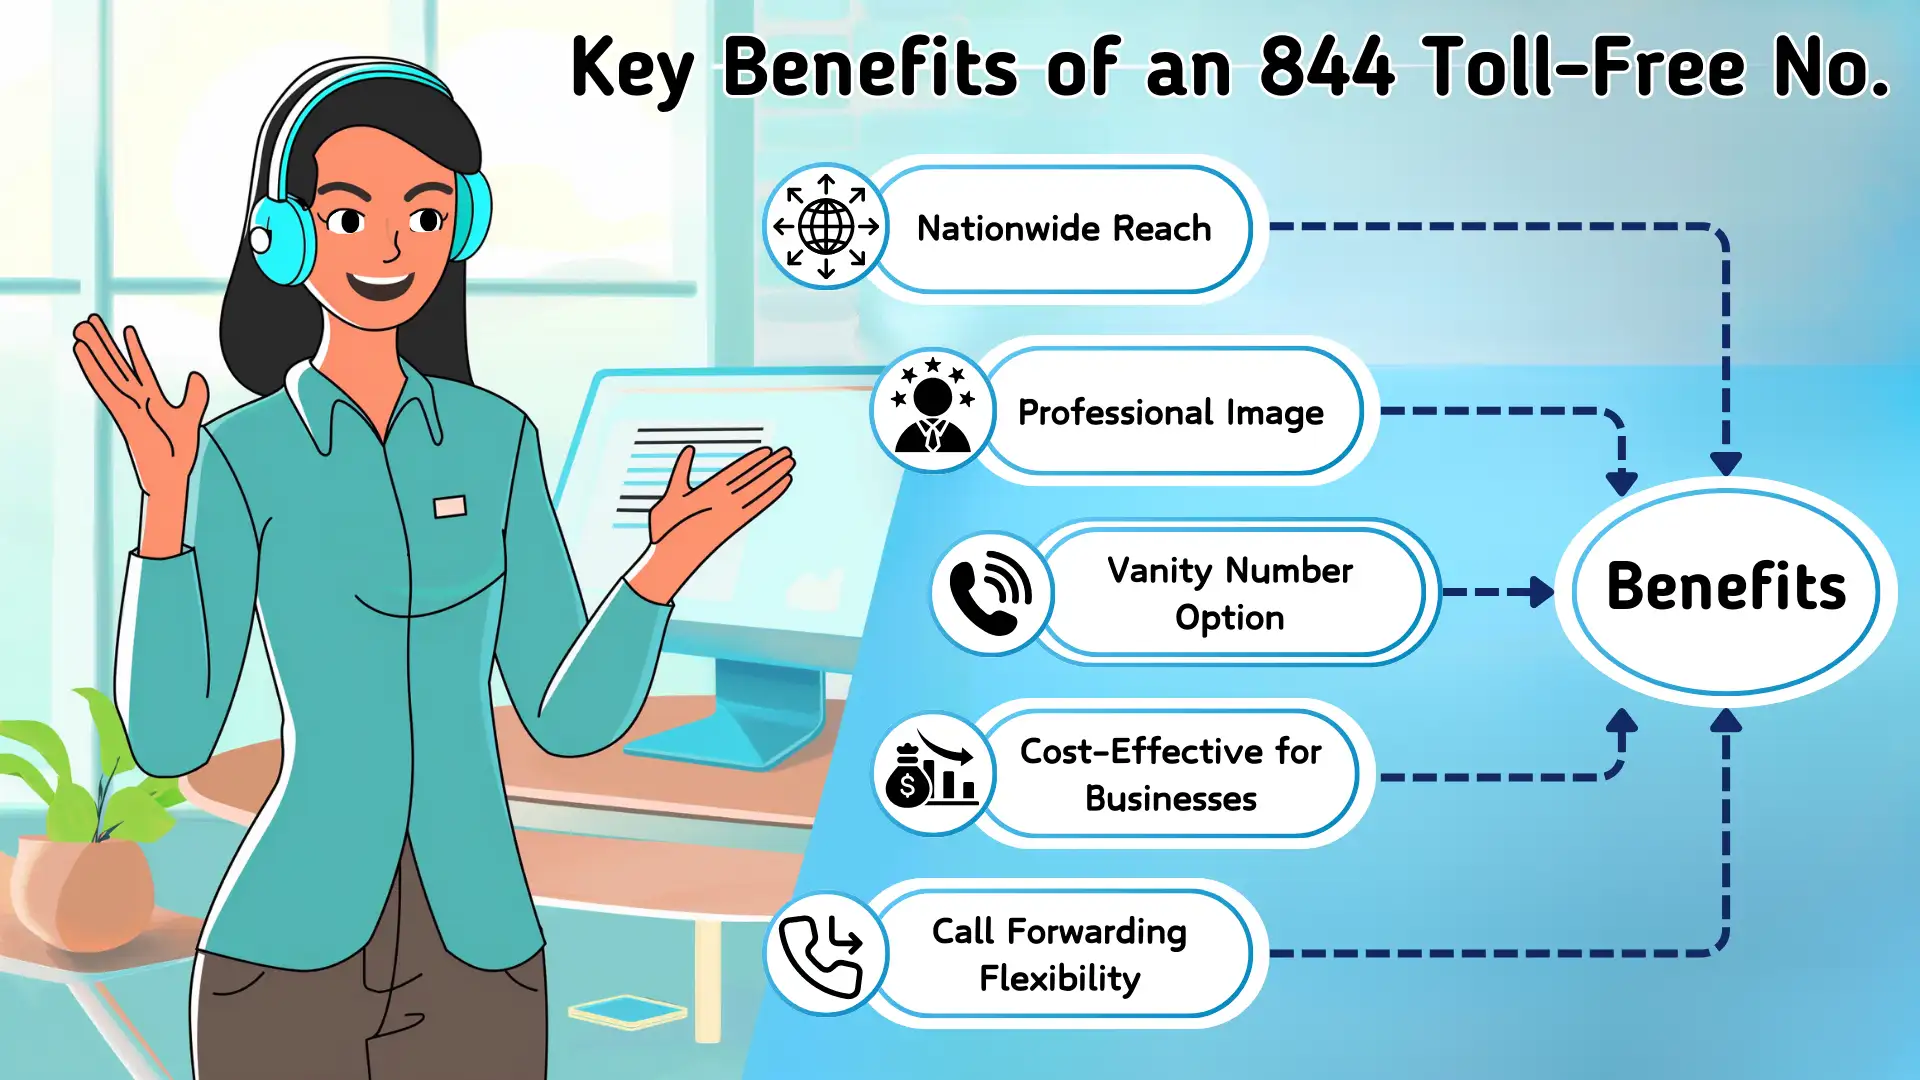 Key Benefits of an 844 Toll-Free Number